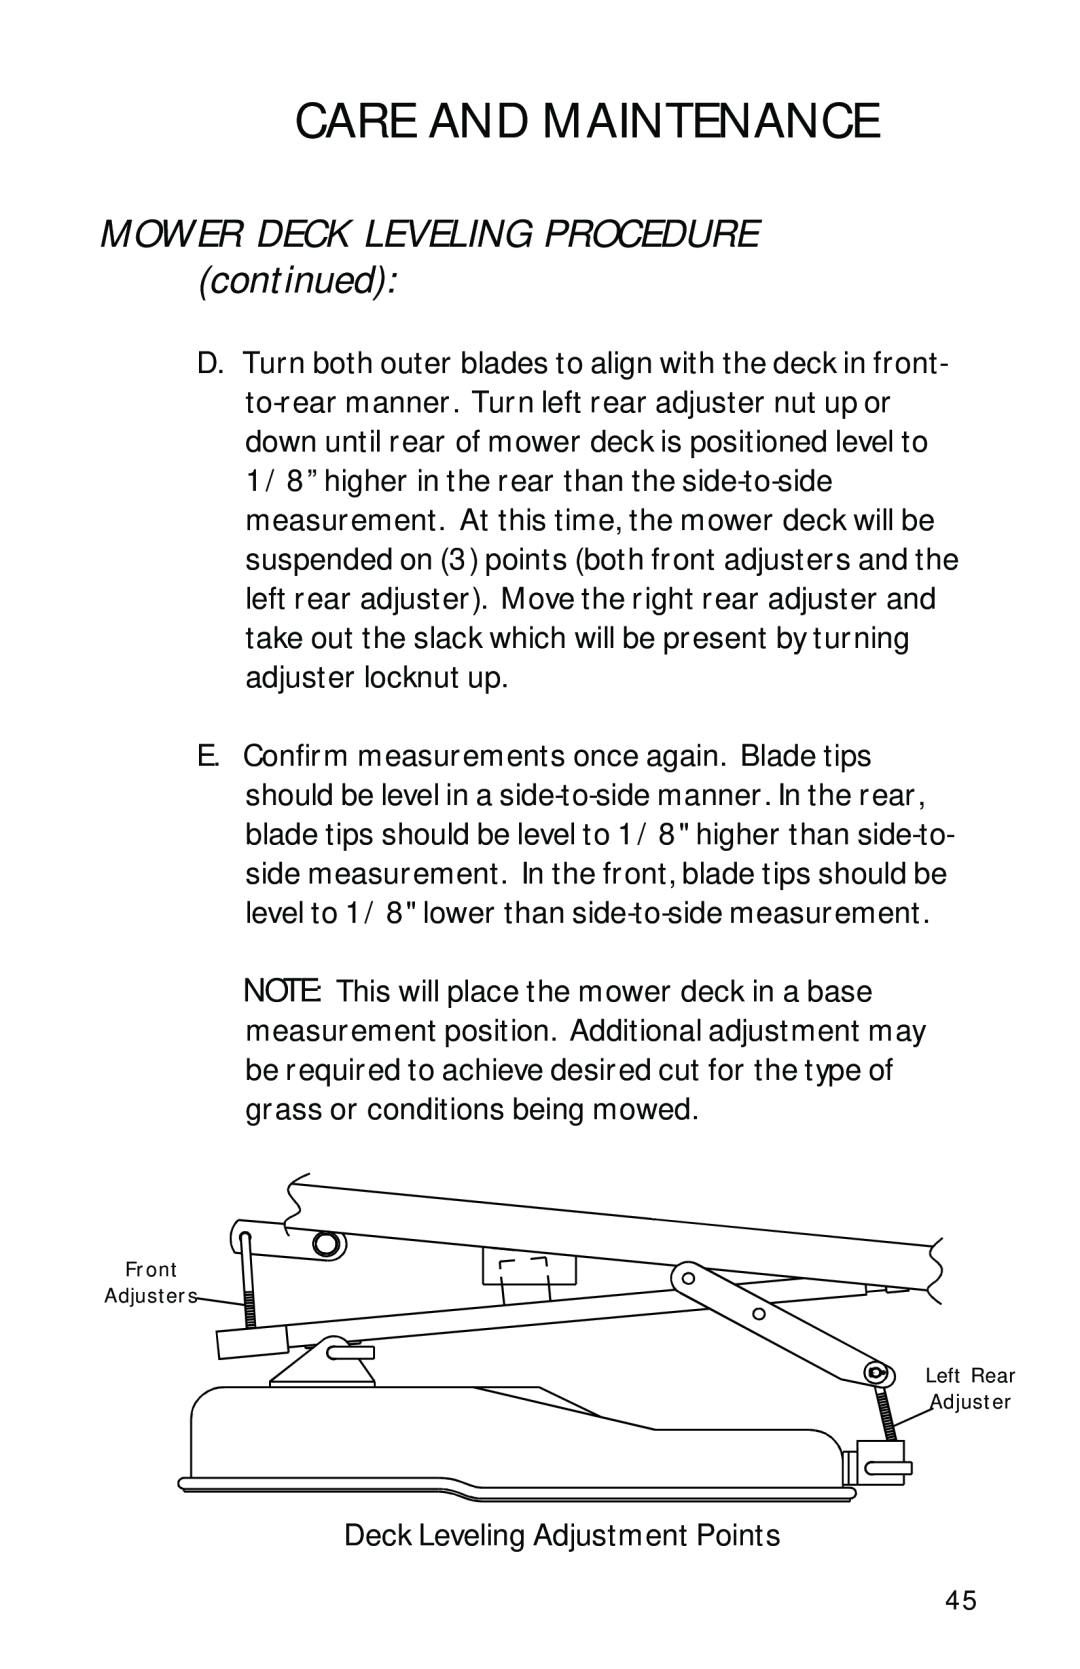 Dixon 1950-2300 Series manual MOWER DECK LEVELING PROCEDURE continued, Care And Maintenance 